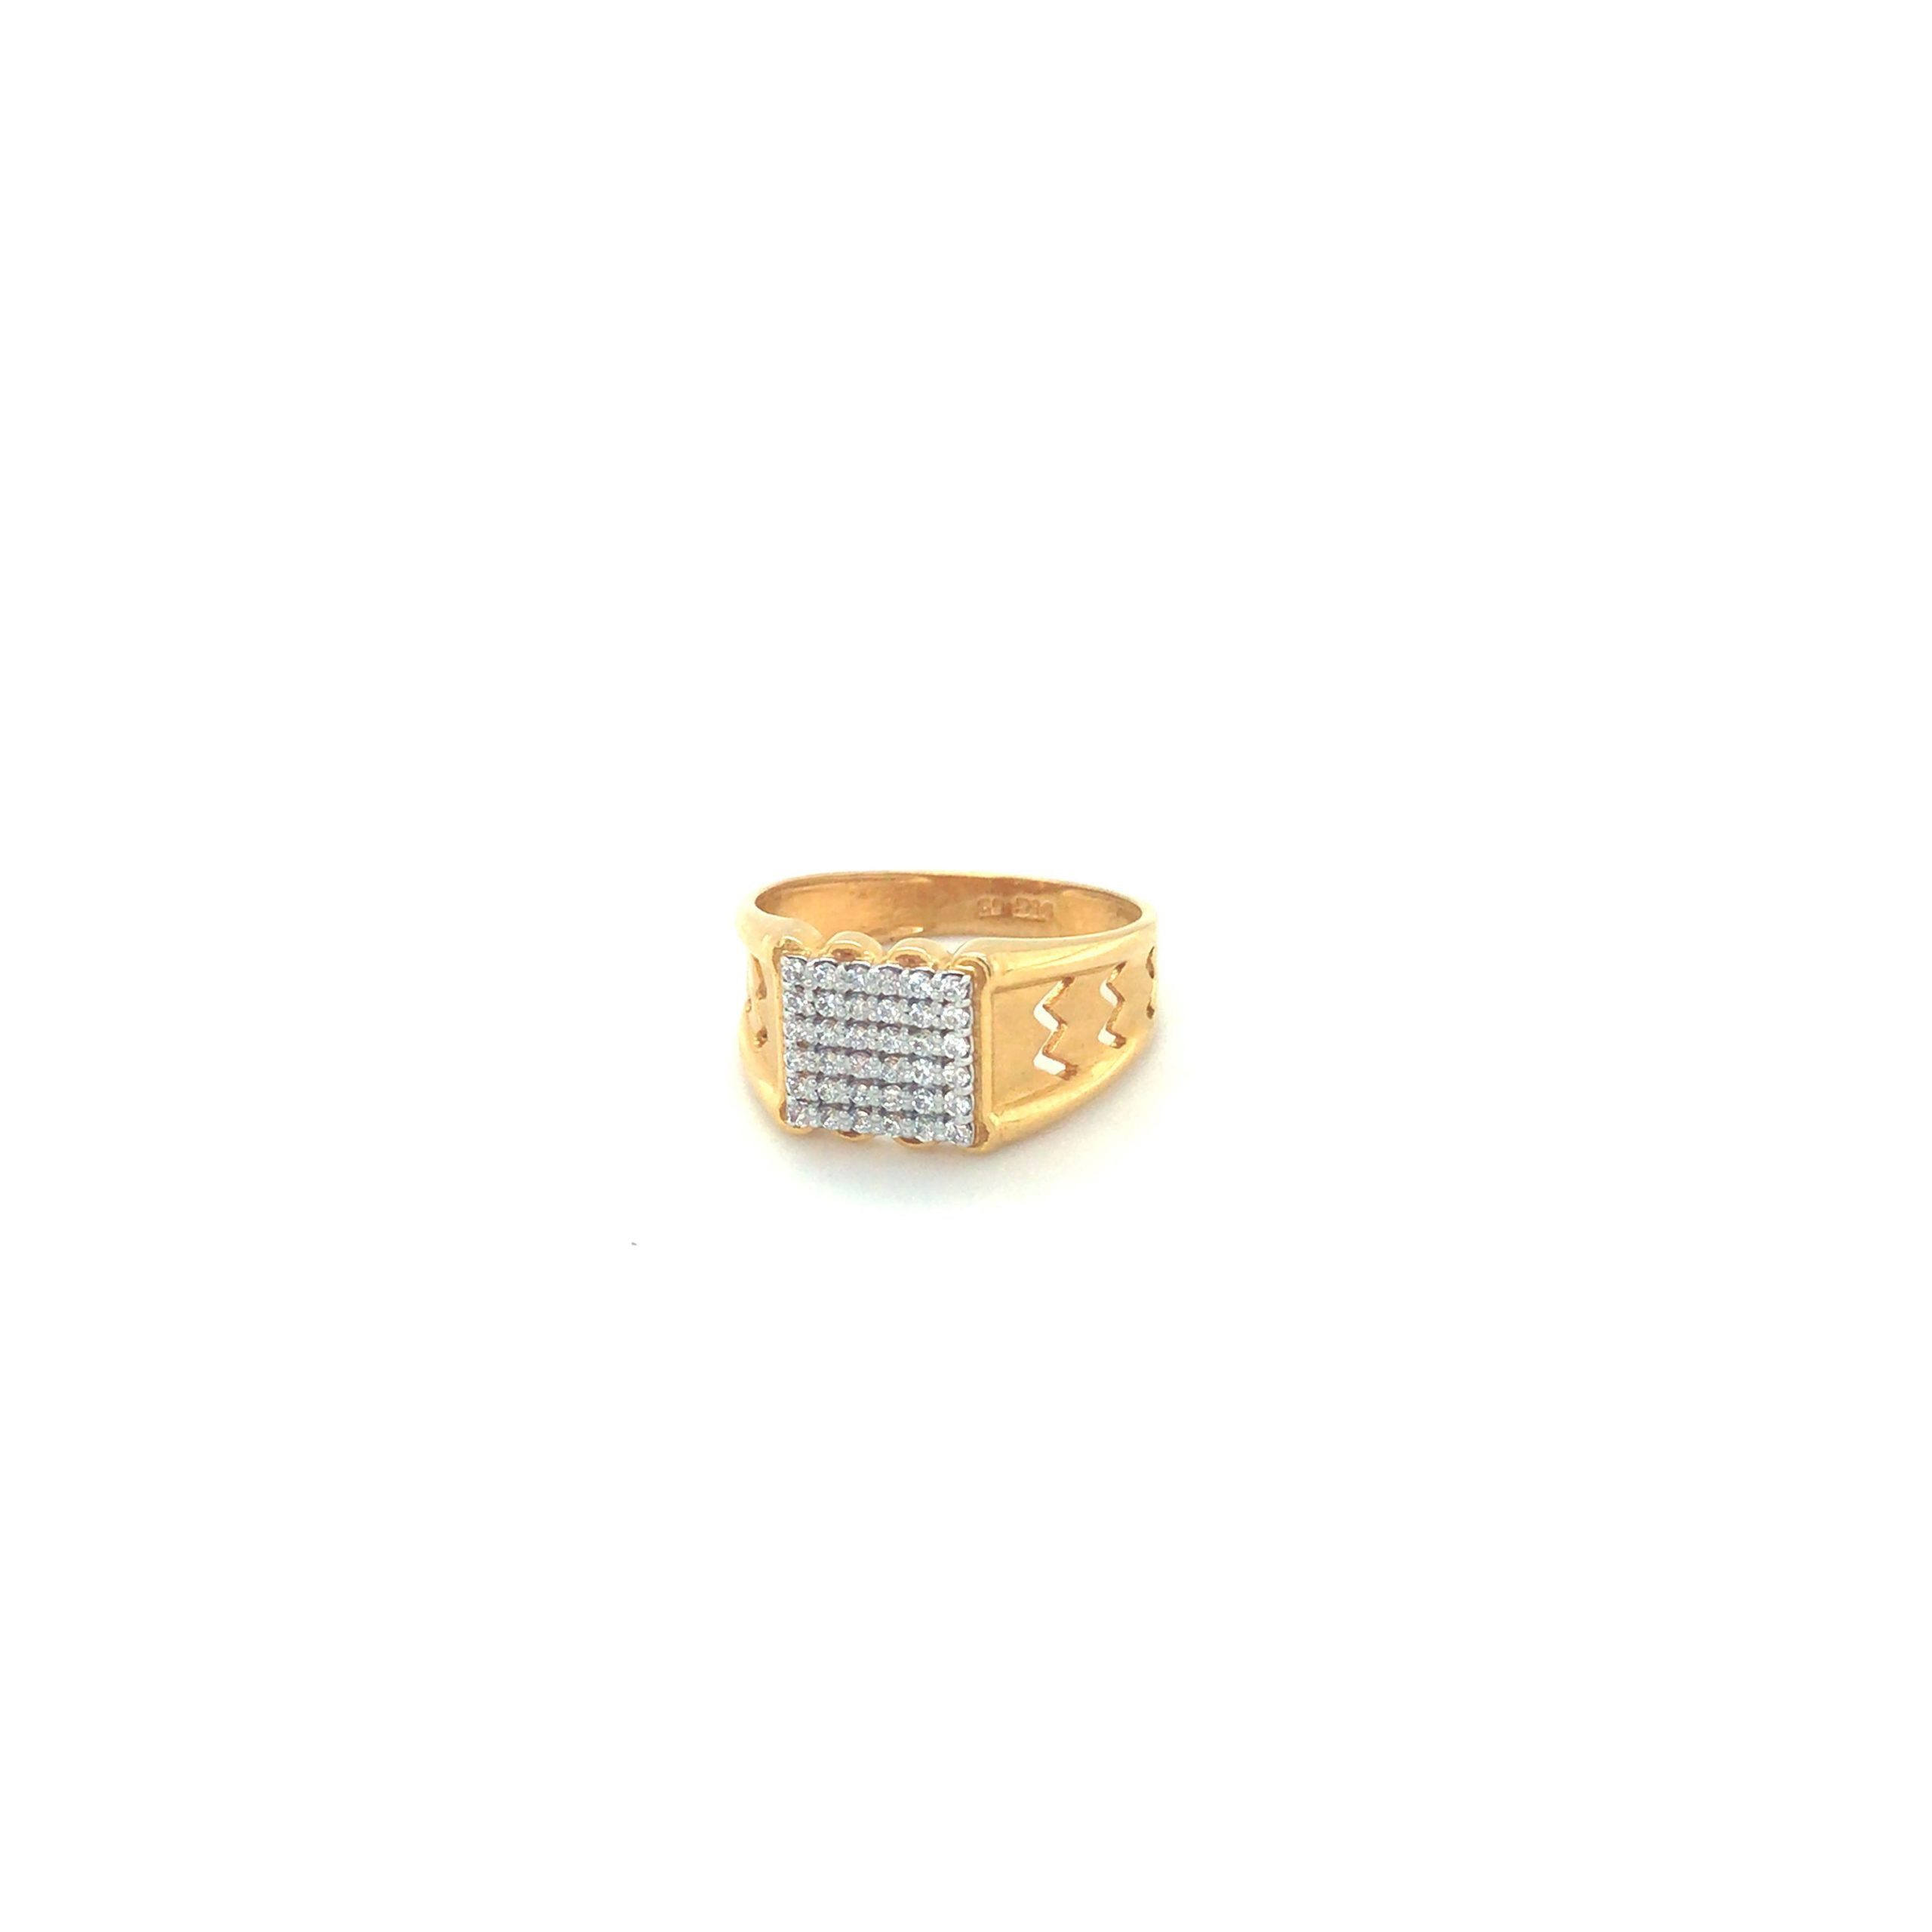 Buy New Premium Quality Brass High Gold Fancy Ladies Finger Ring Online  From Surat Wholesale Shop.